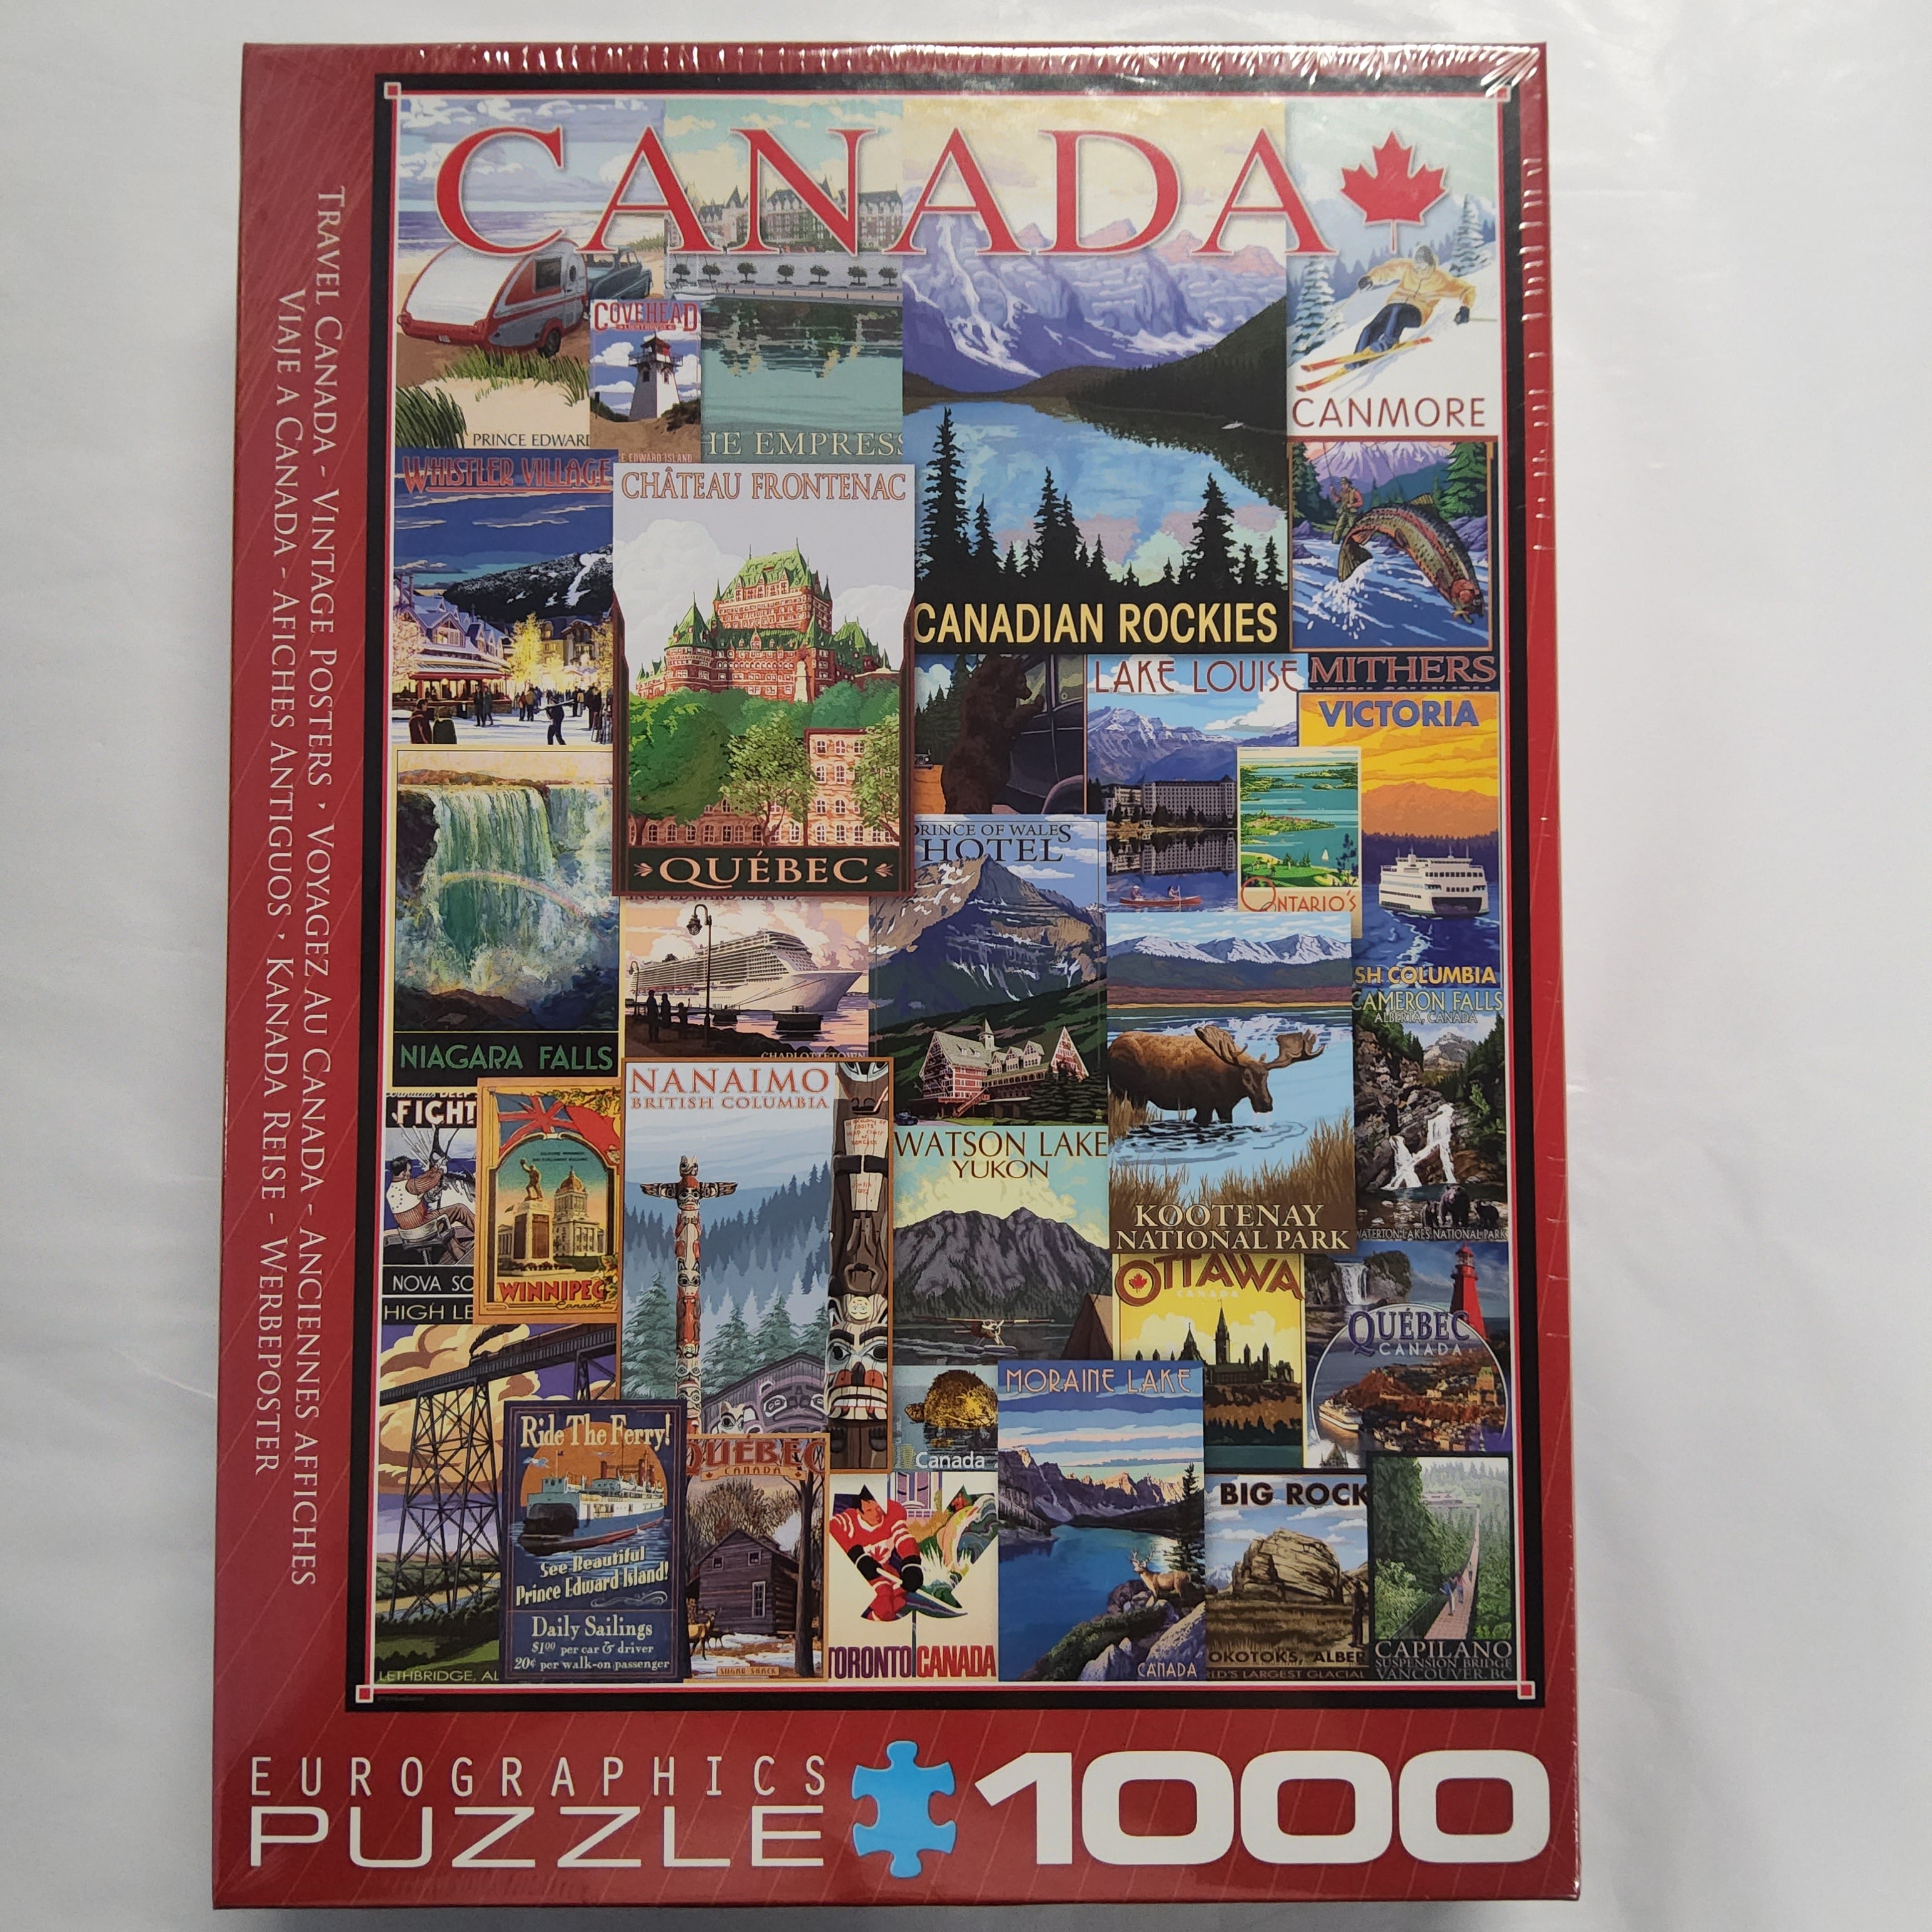 Eurographics Puzzle - Travel Canada - Vintage Posters - 1000 pieces - 6000-0778